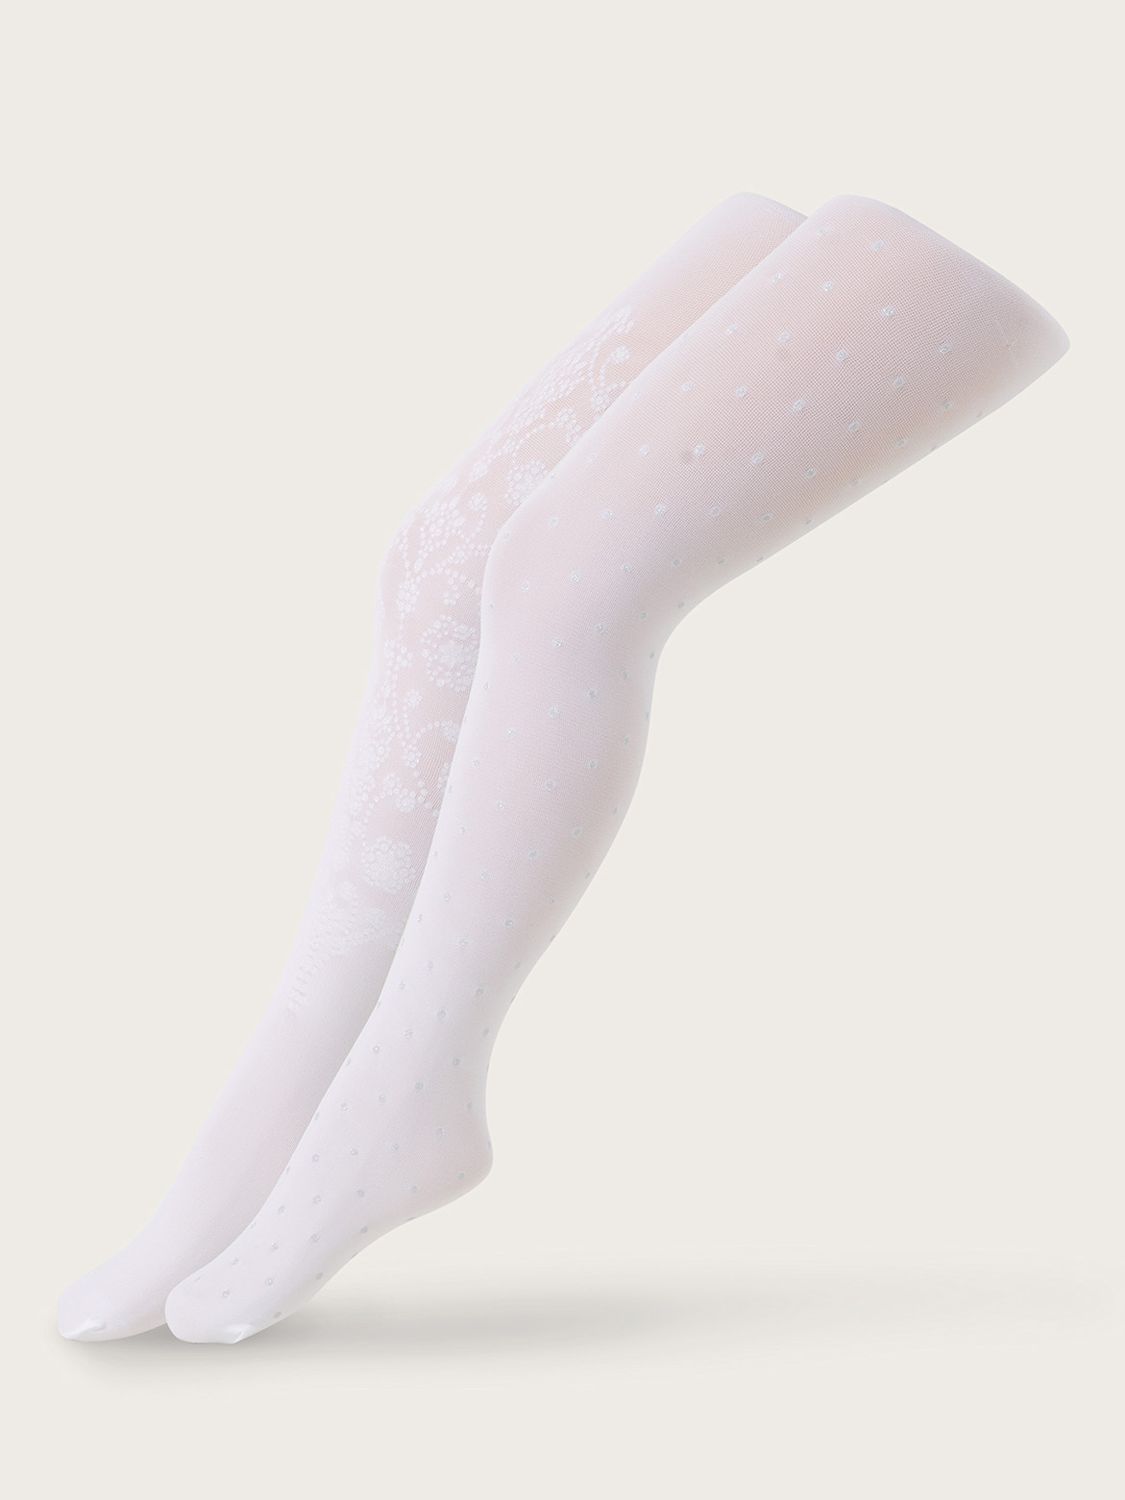 Buy Monsoon Kids' Glitter Tights, Set of 2, Silver Online at johnlewis.com